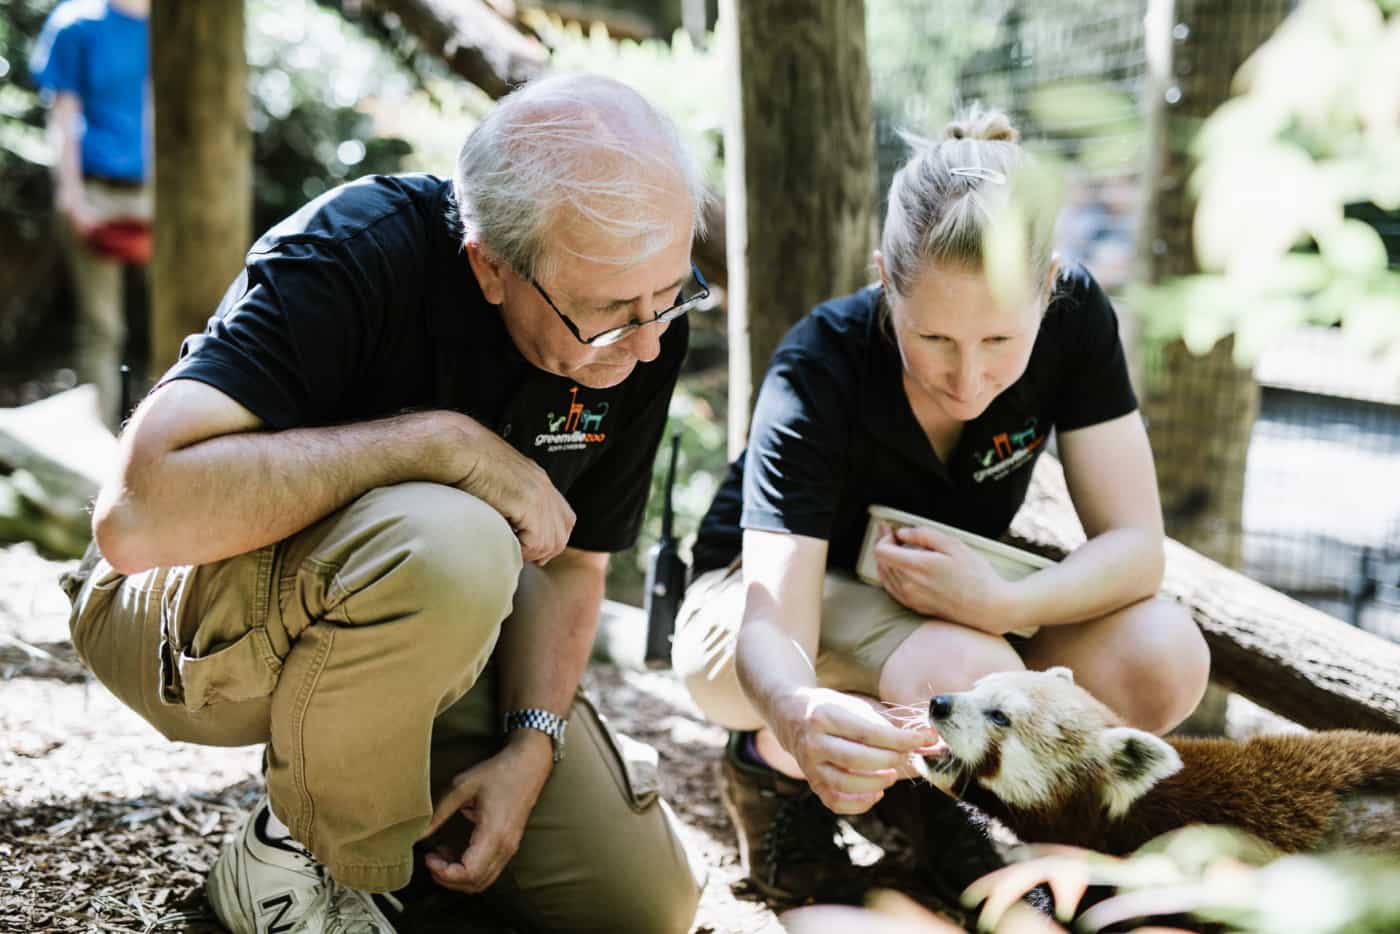 Keepers at Greenville Zoo